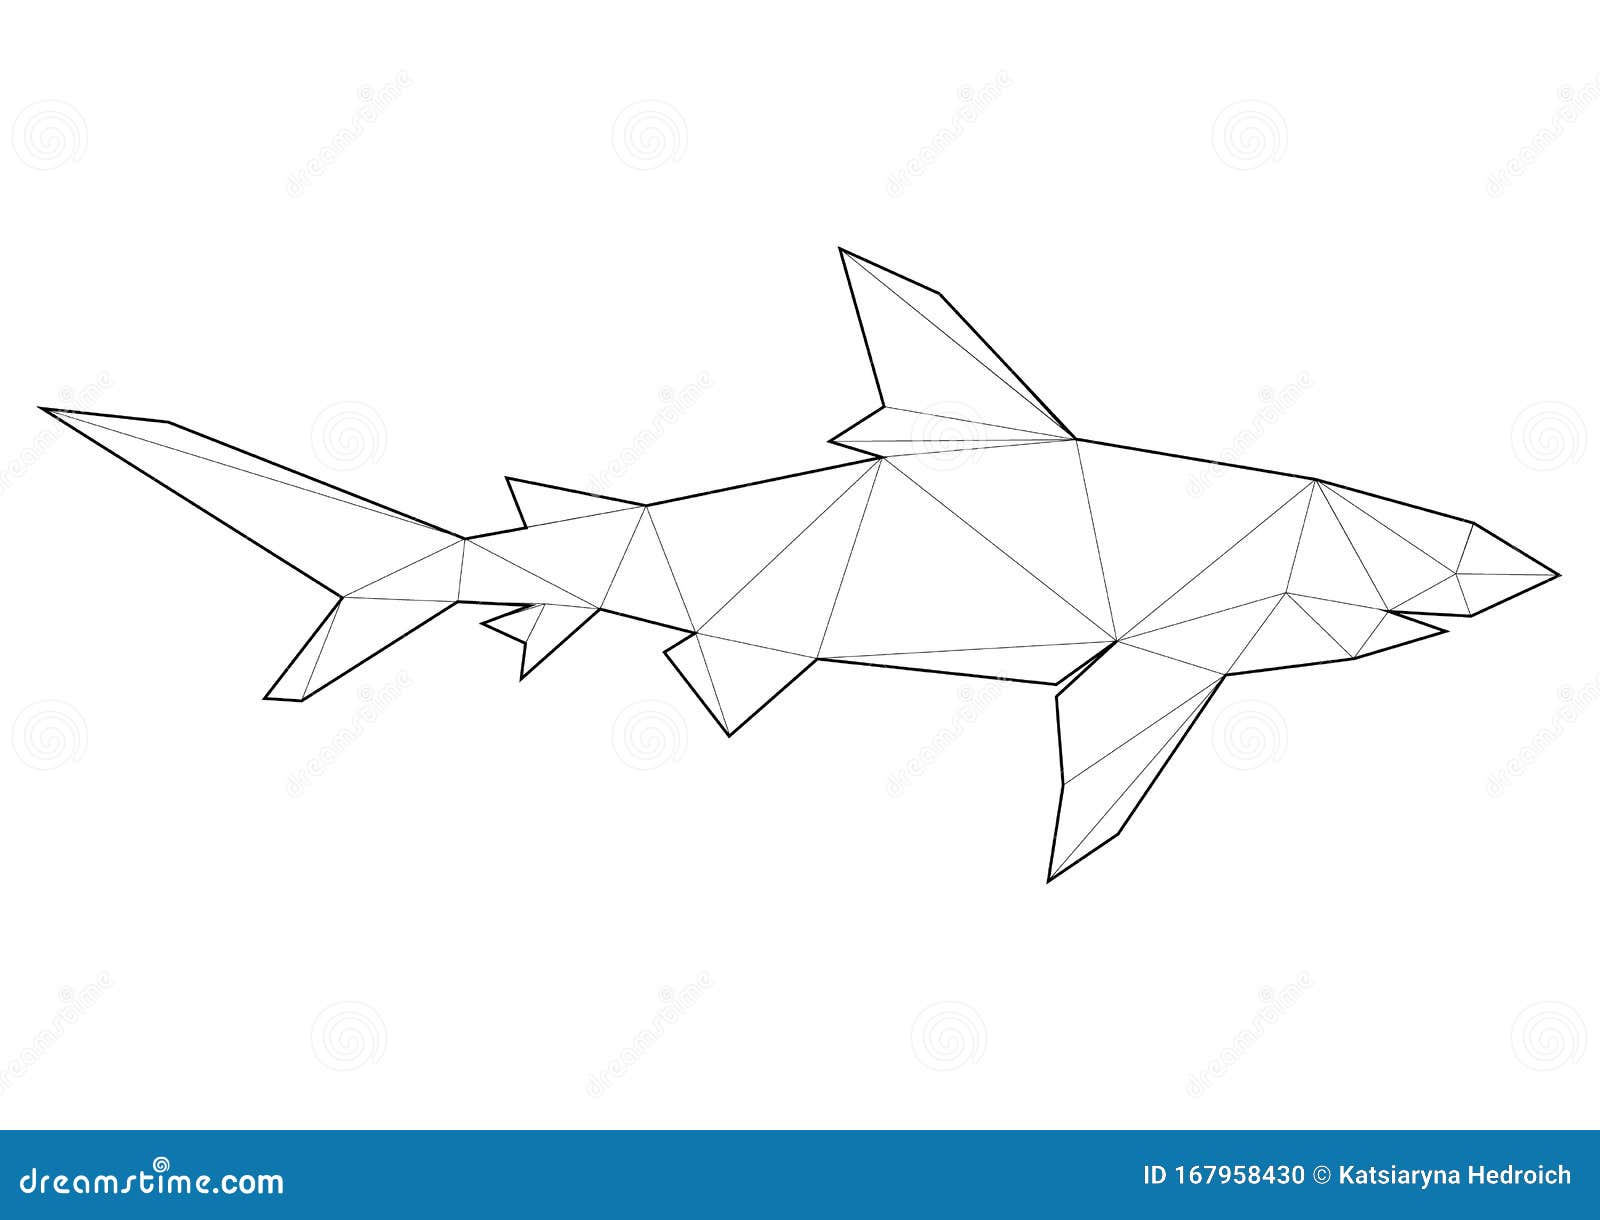 Low poly art of animals shark good for wall decoration printable images suitable for coloring pages stock vector